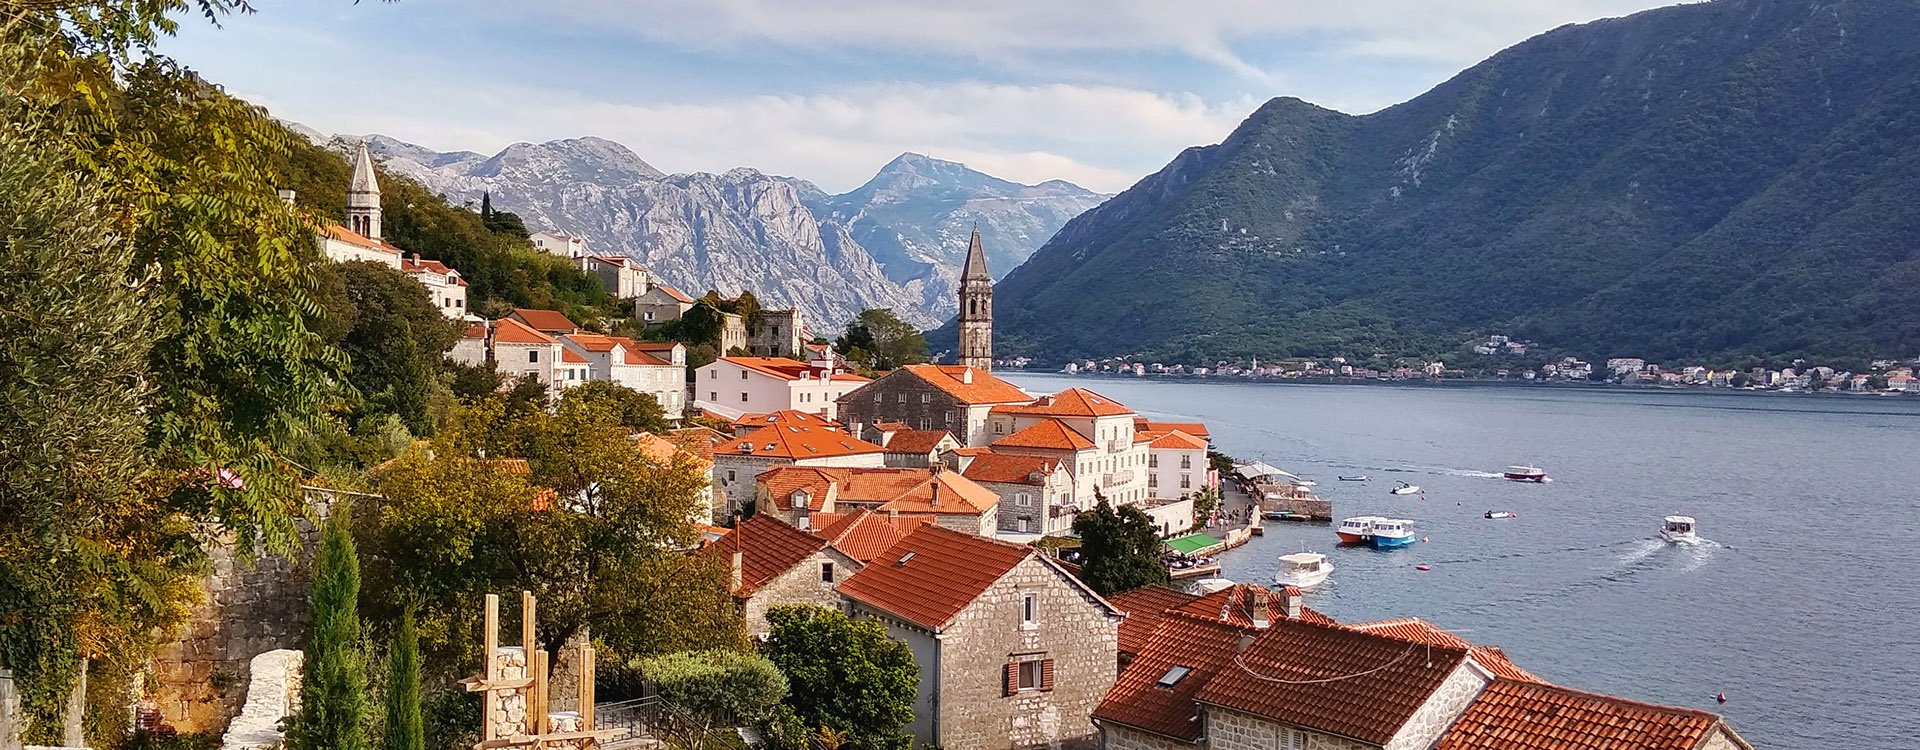 old town in italy. Nature and sea in Europe. Morning and evening in the Bay of Kotor, Montenegro.